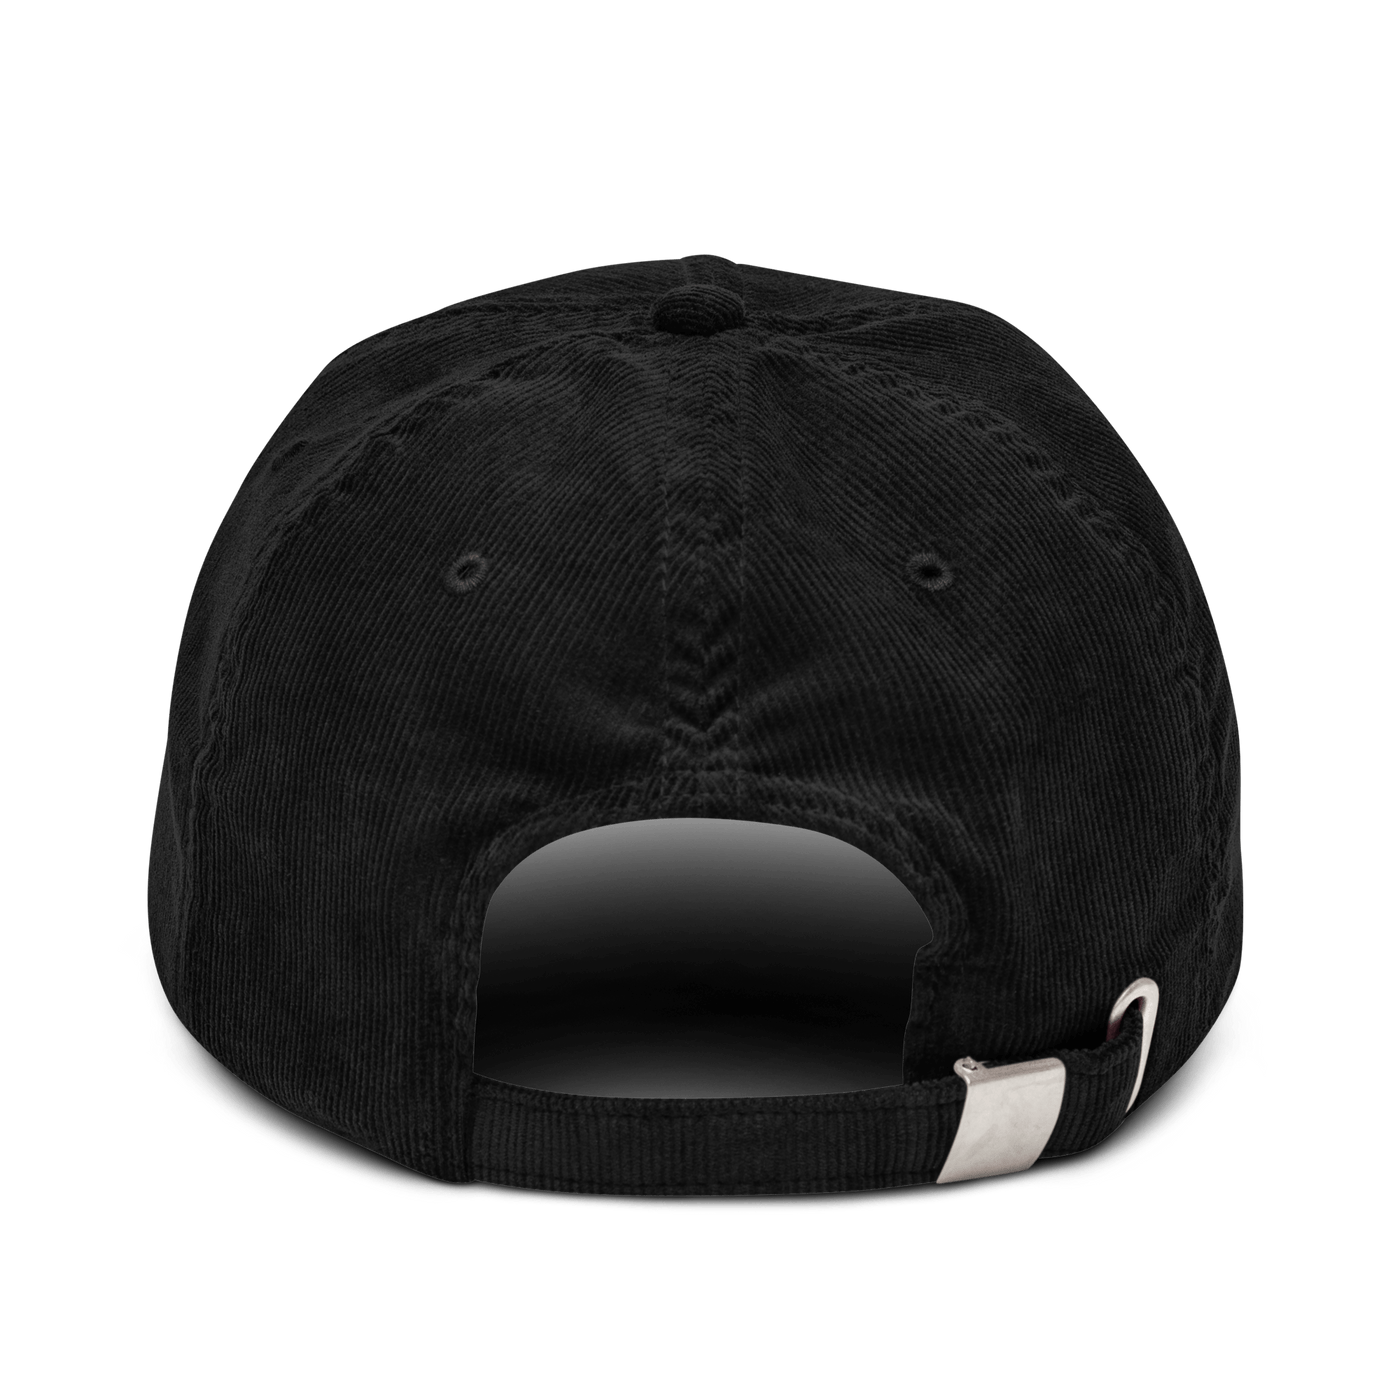 Bucatini all'Amatriciana Corduroy hat - Black - - Just Another Cap Store